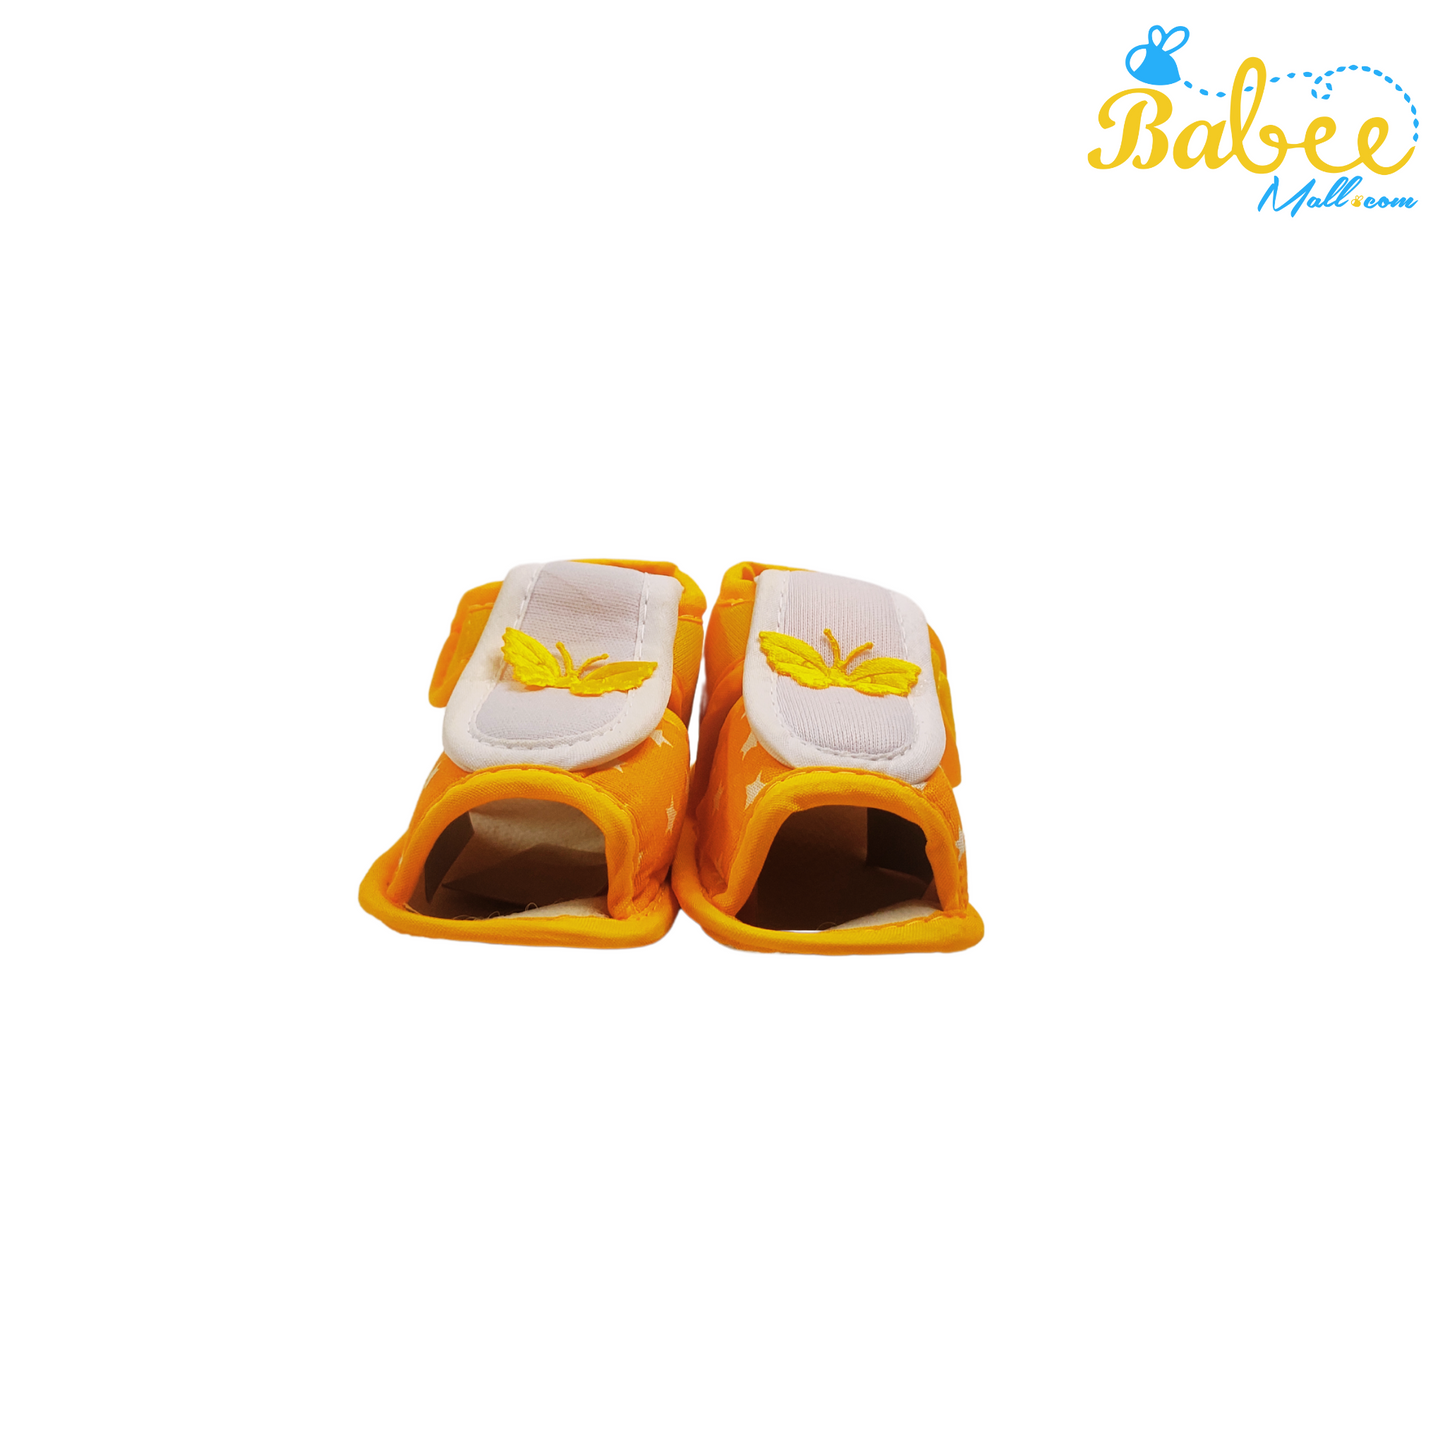 Fashion Newborn Baby Shoes - The Perfect First Steps in Style and Comfort 0-12 Month's (Orange)